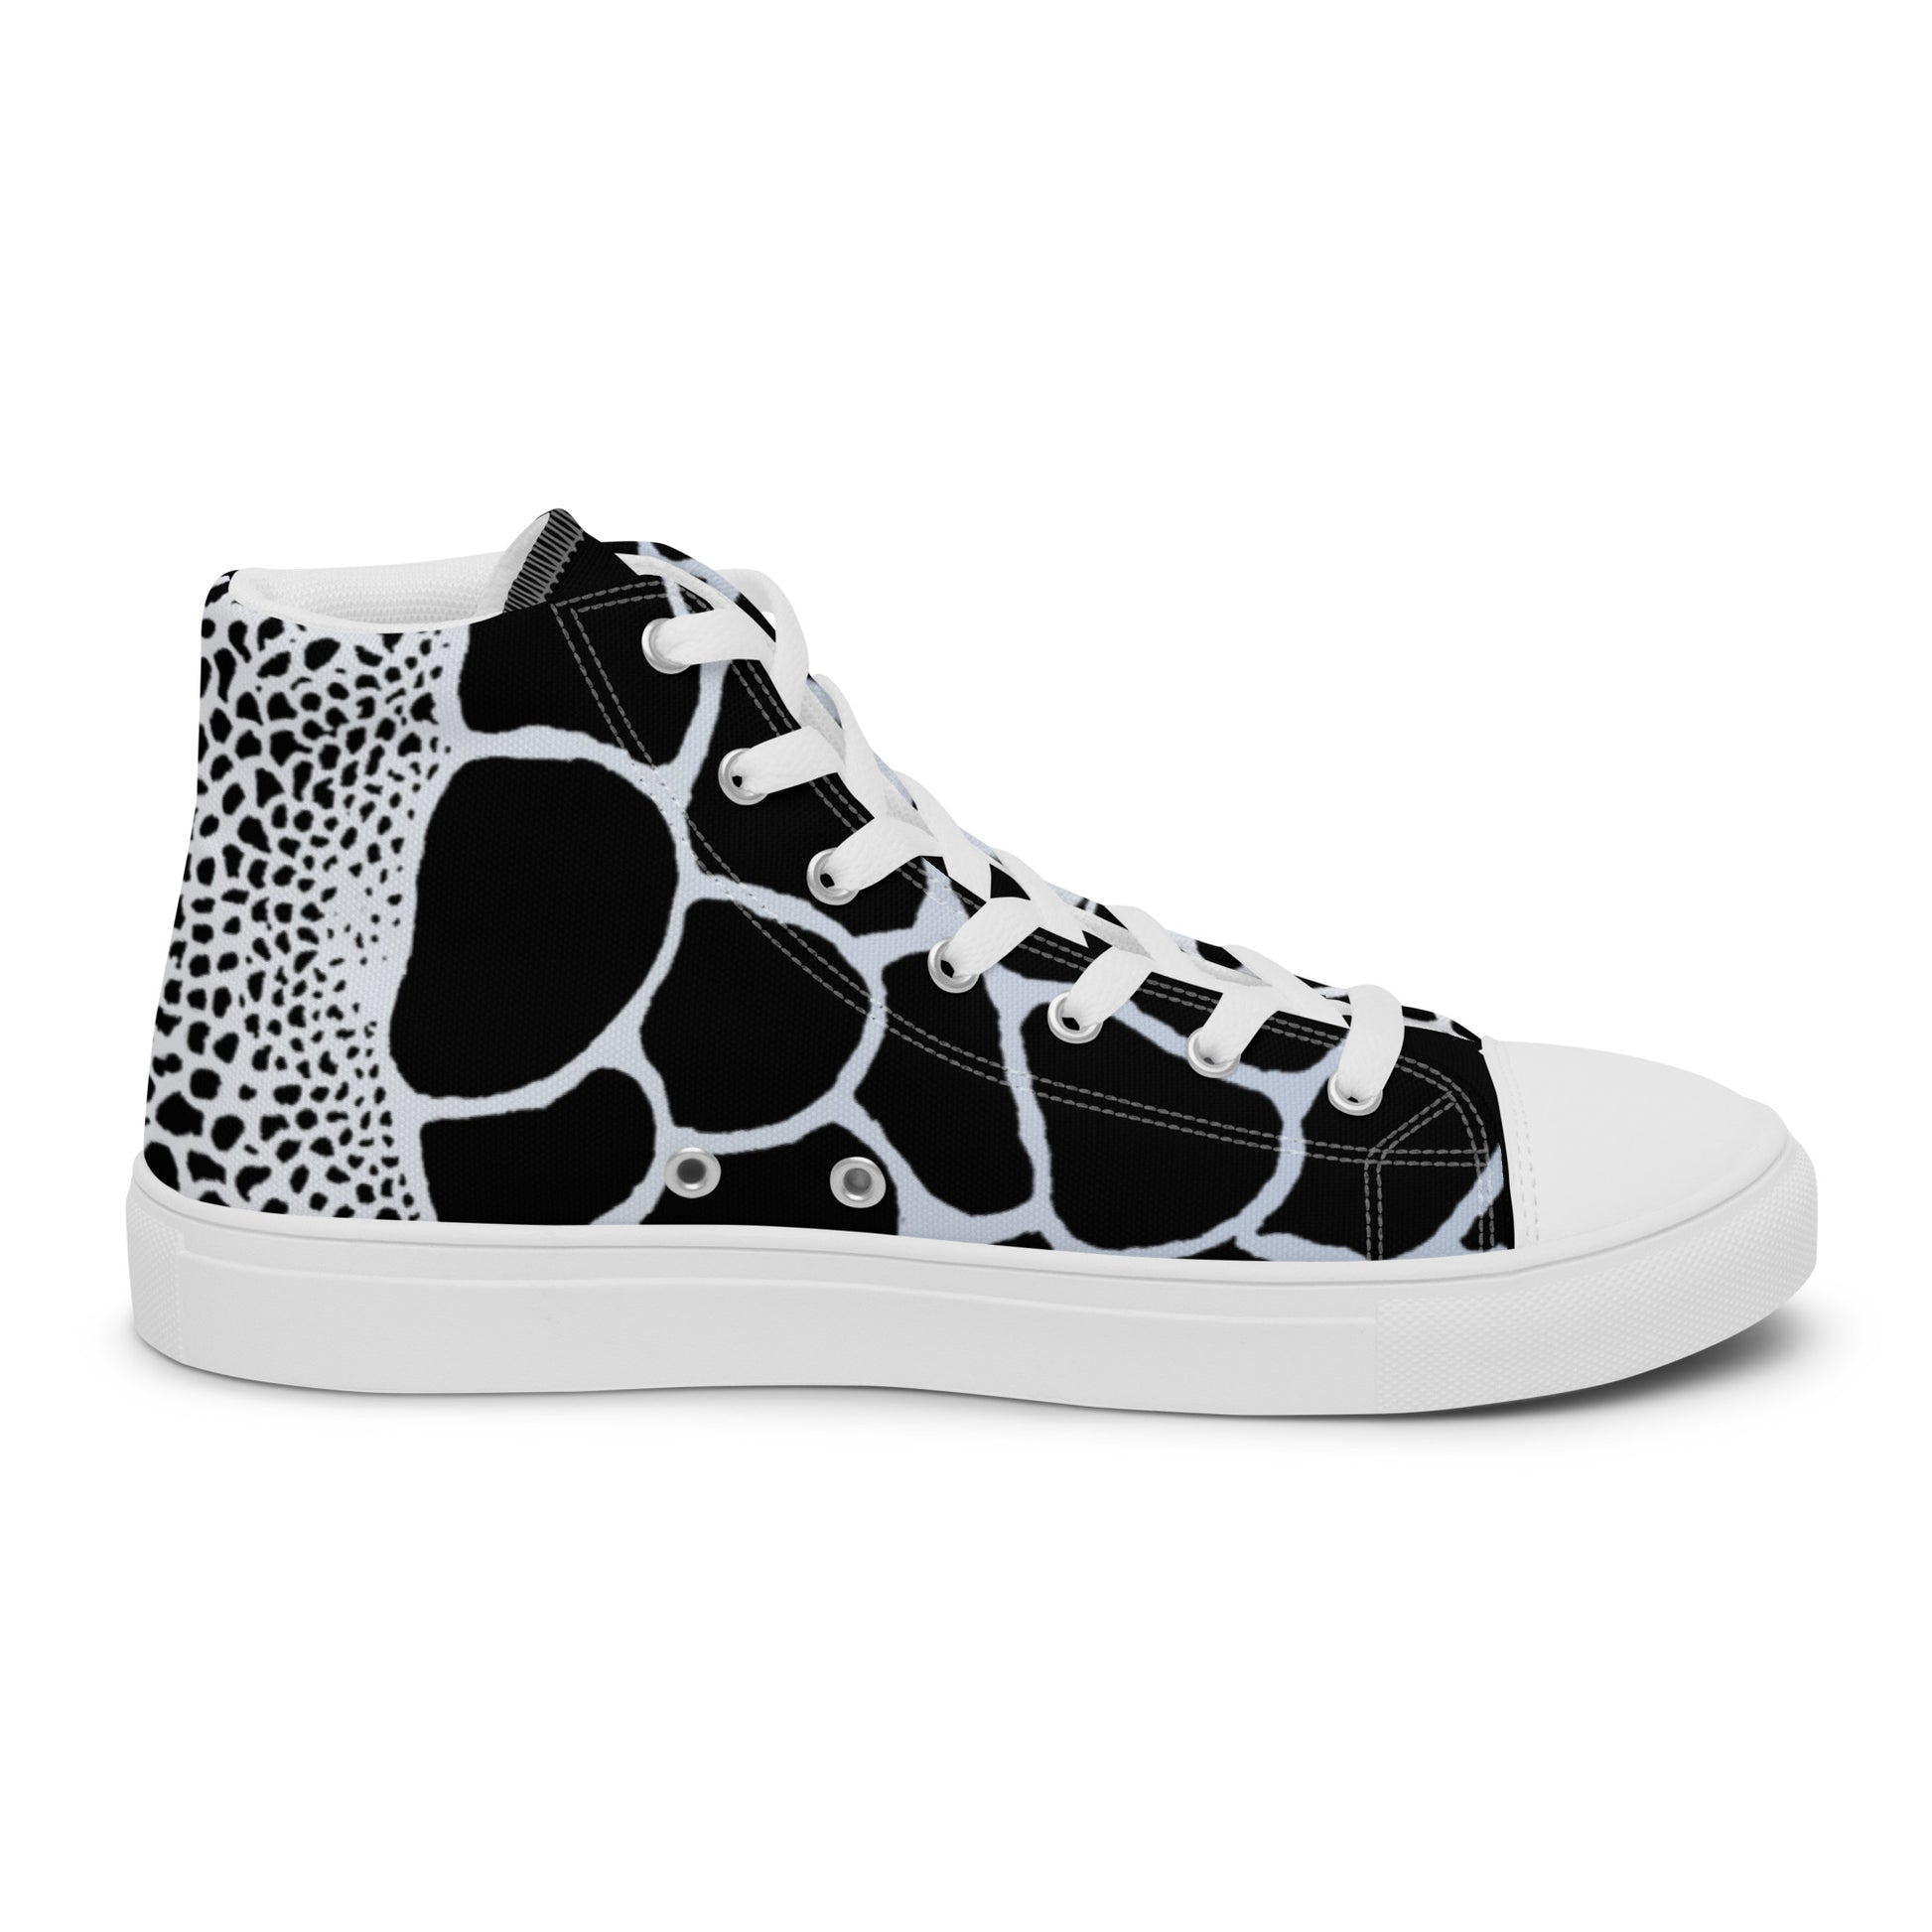 Organic Black Men’s High Top Canvas Shoes | Casual Print Shoes | Stylish Festival Sneakers | Abstract Shoes | Lace Up Sneakers | - Comfortable Culture - Shoes - Comfortable Culture